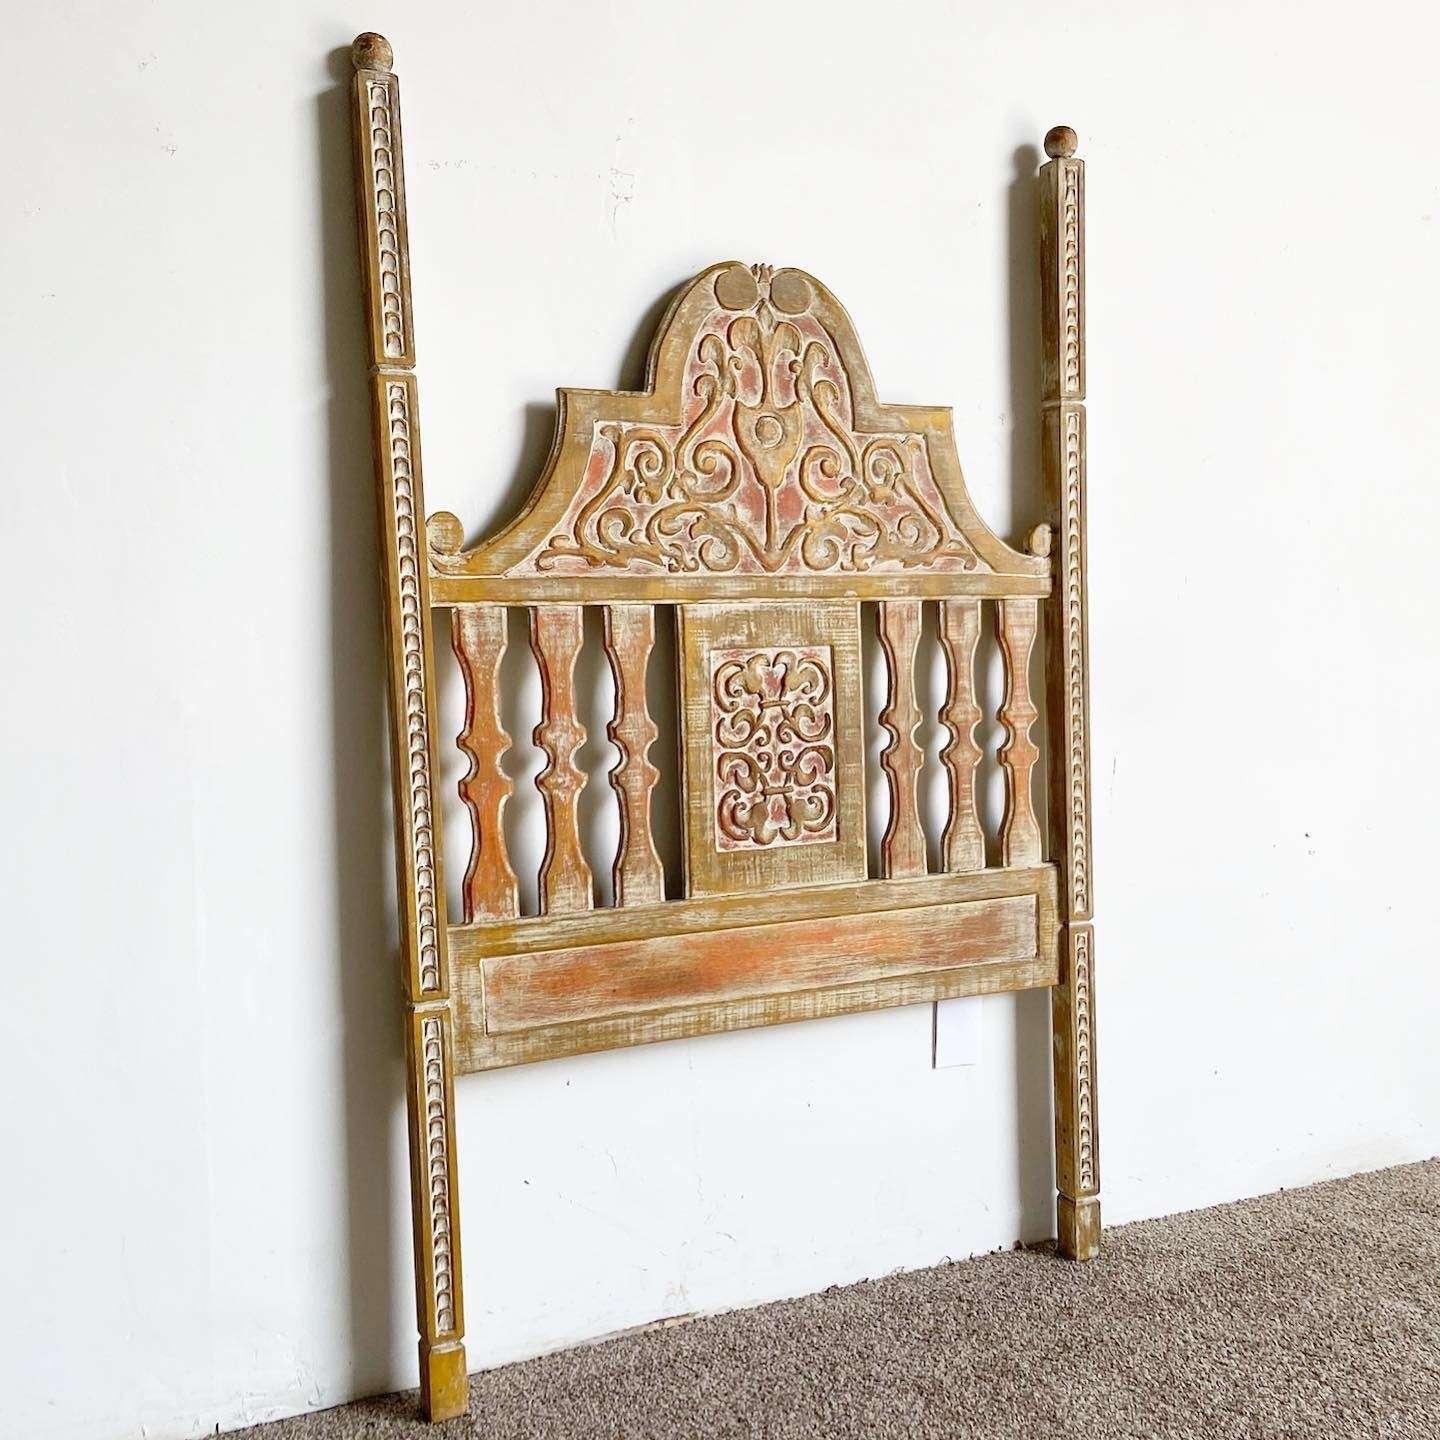 Exquisite vintage Spanish/Mexican rustic farmhouse twin size headboard by Artes de Mexico. Features a hand carved build with a distressed finish. 